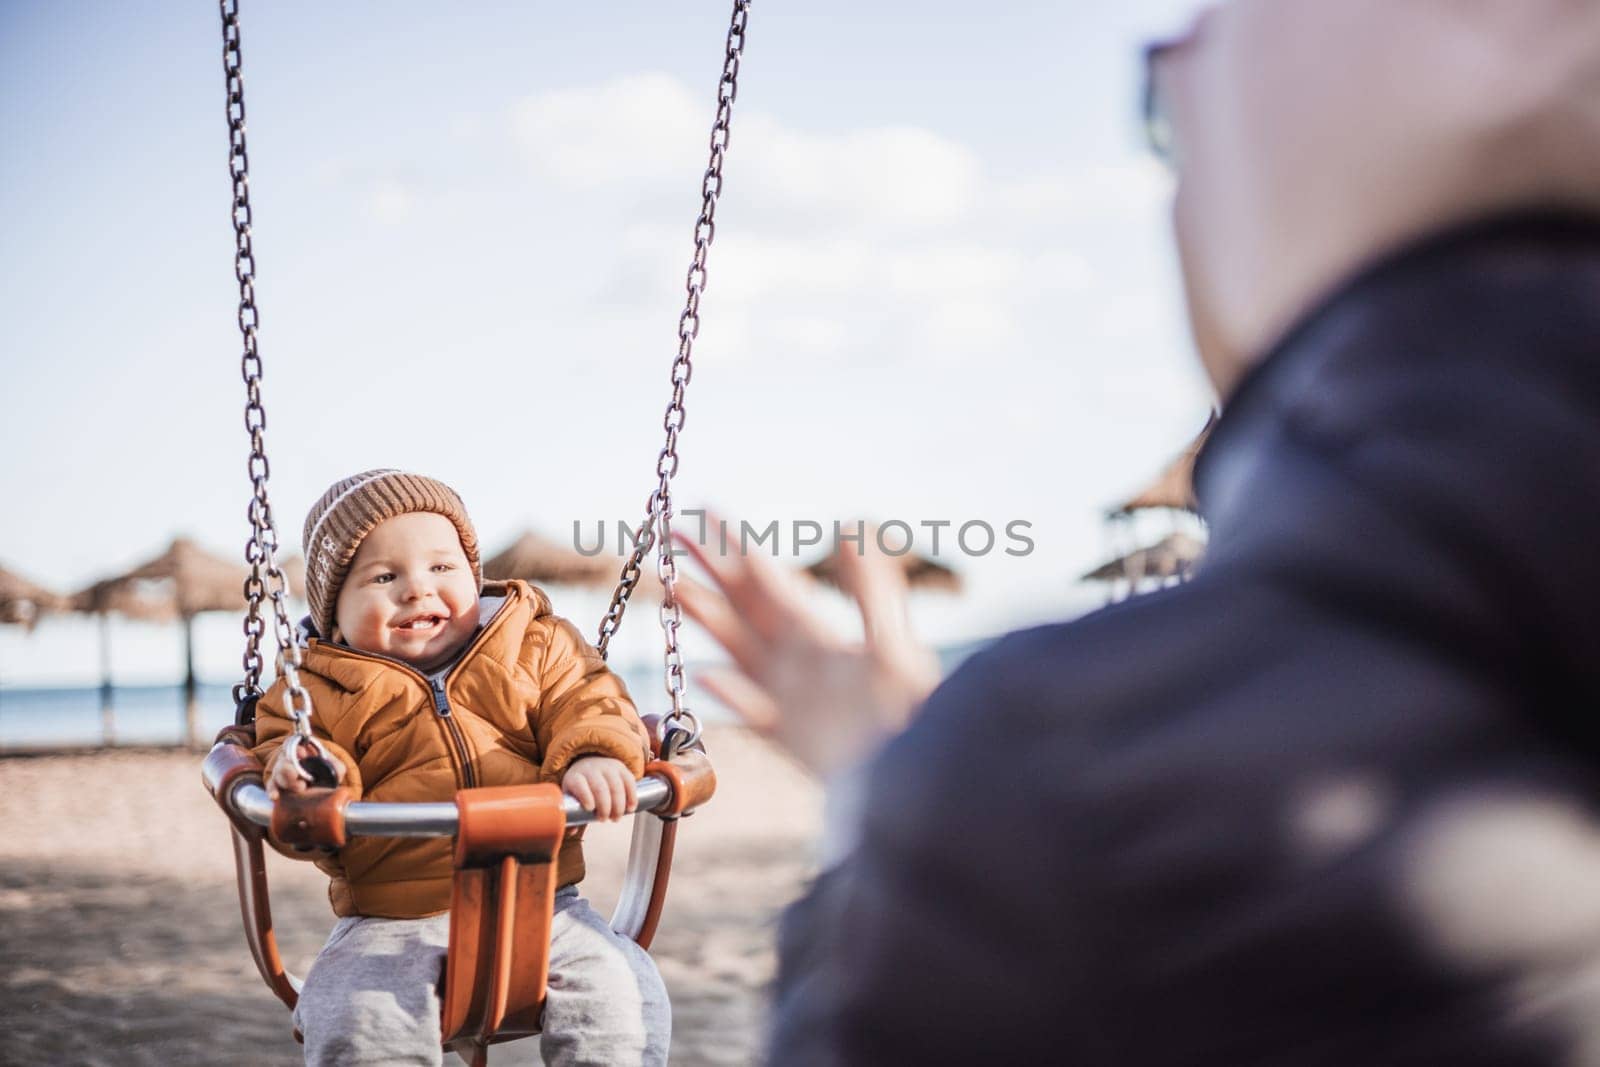 Mother pushing her cheerful infant baby boy child on a swing on sandy beach playground outdoors on nice sunny cold winter day in Malaga, Spain